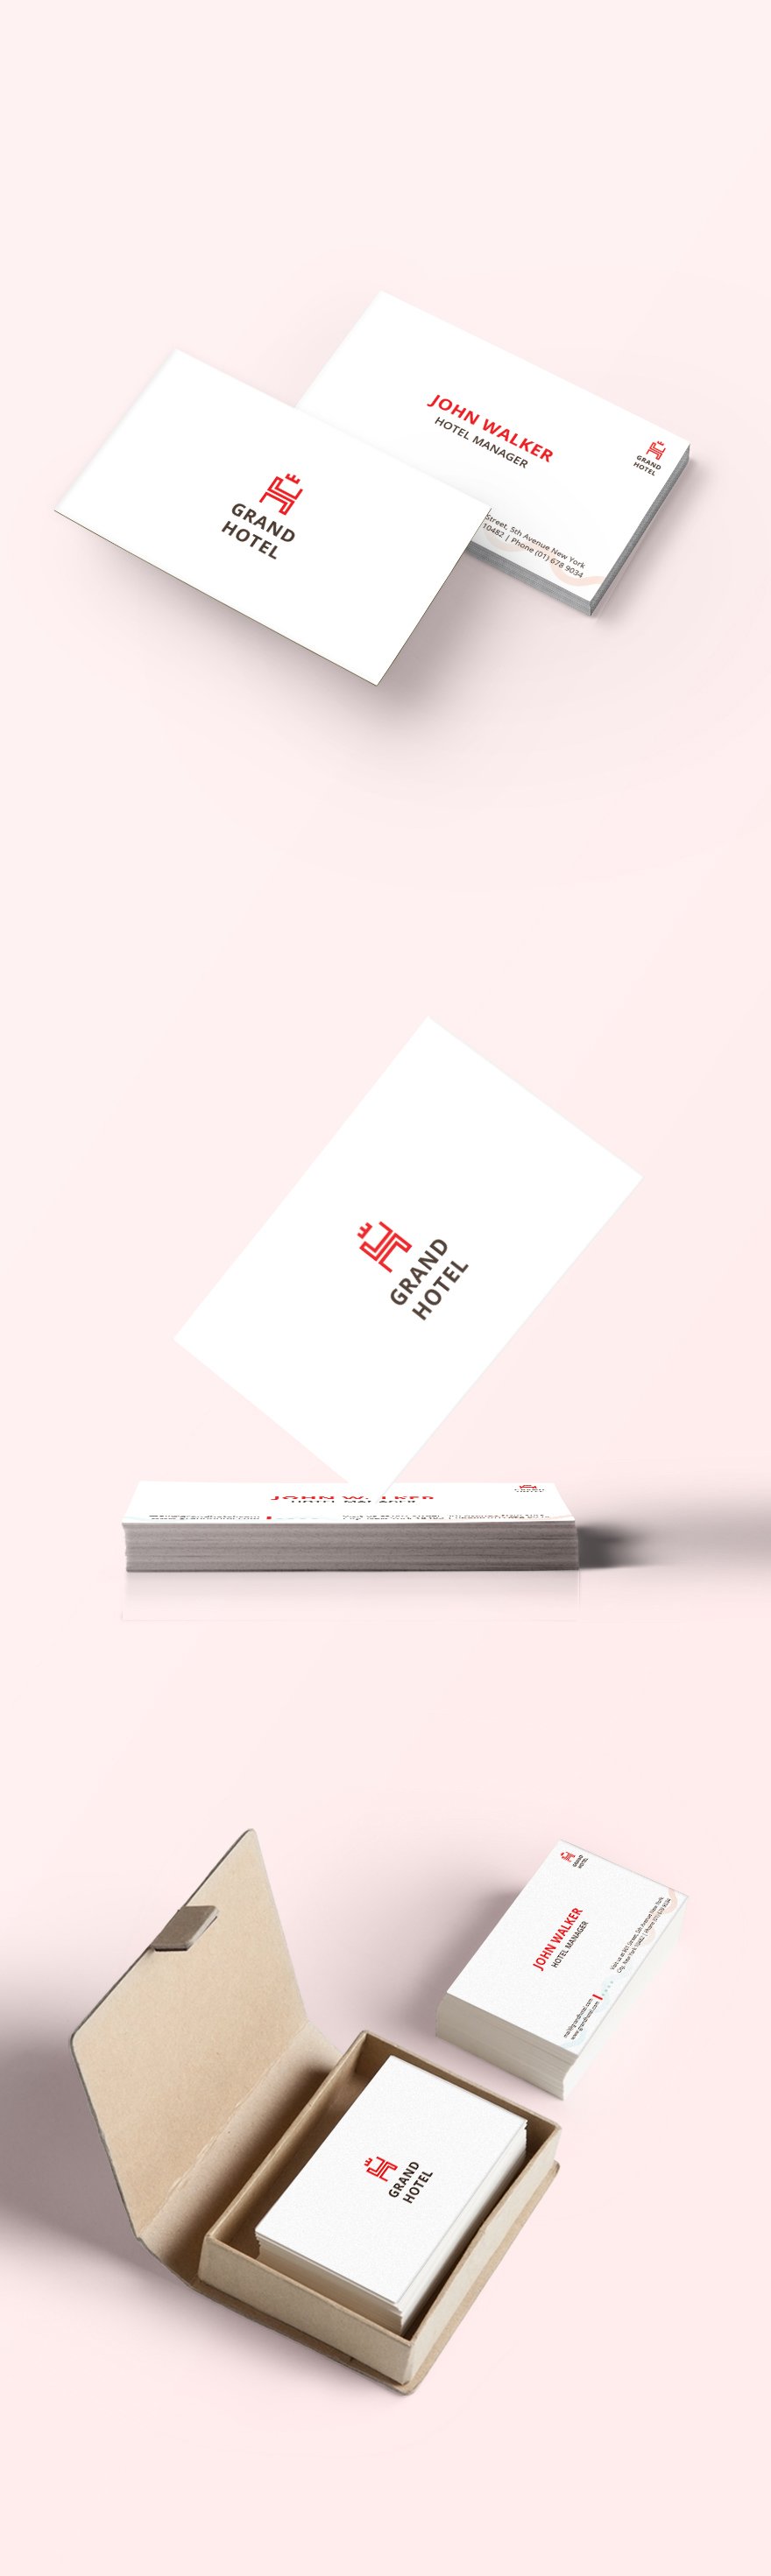 Grand Hotel Business Card Template